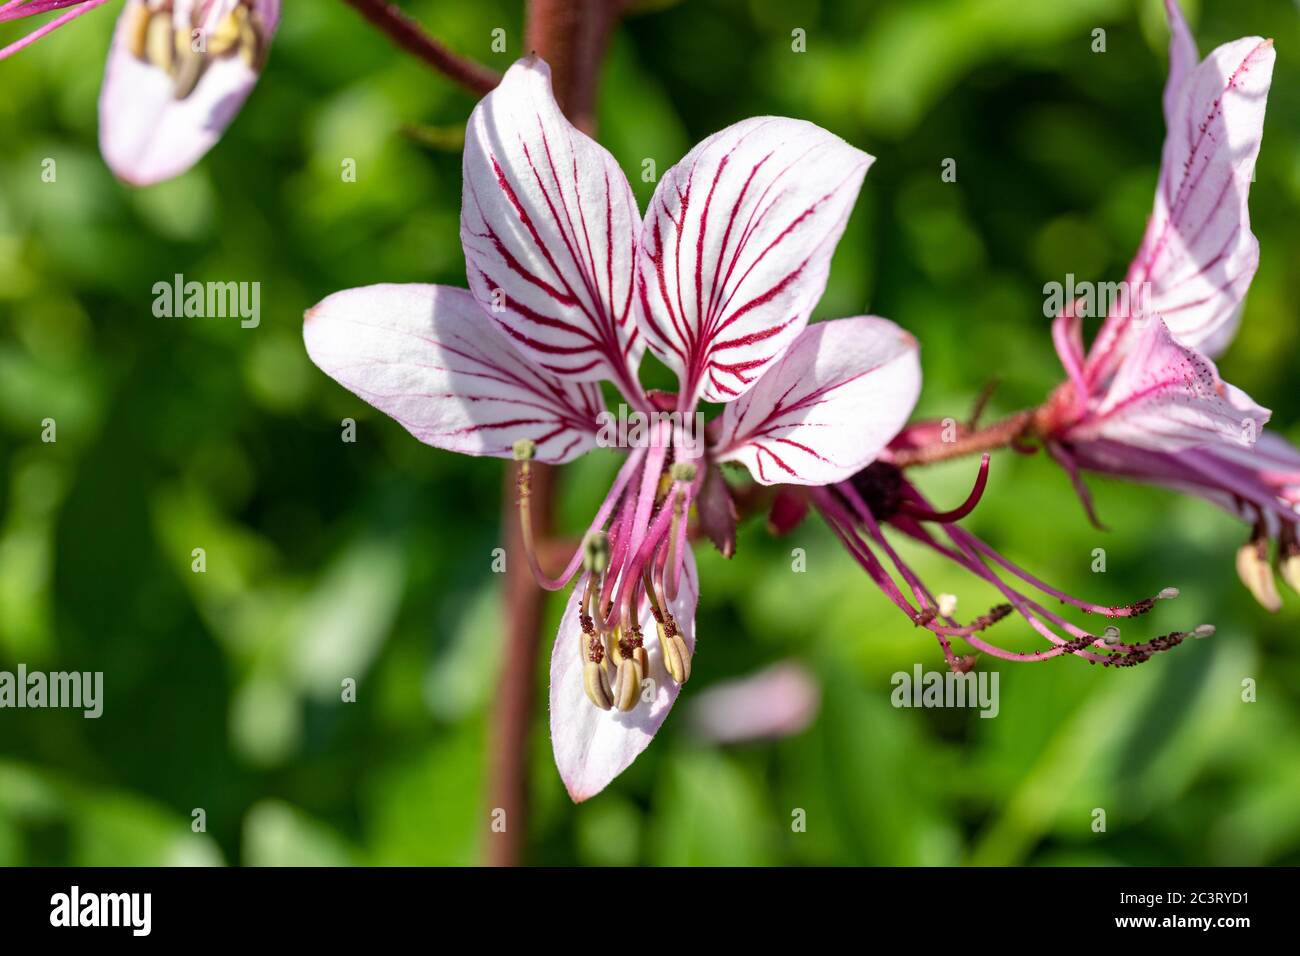 Pale purple flower of Dictamnus albus (also known as burning bush, dittany, gas plant, and fraxinella) Stock Photo